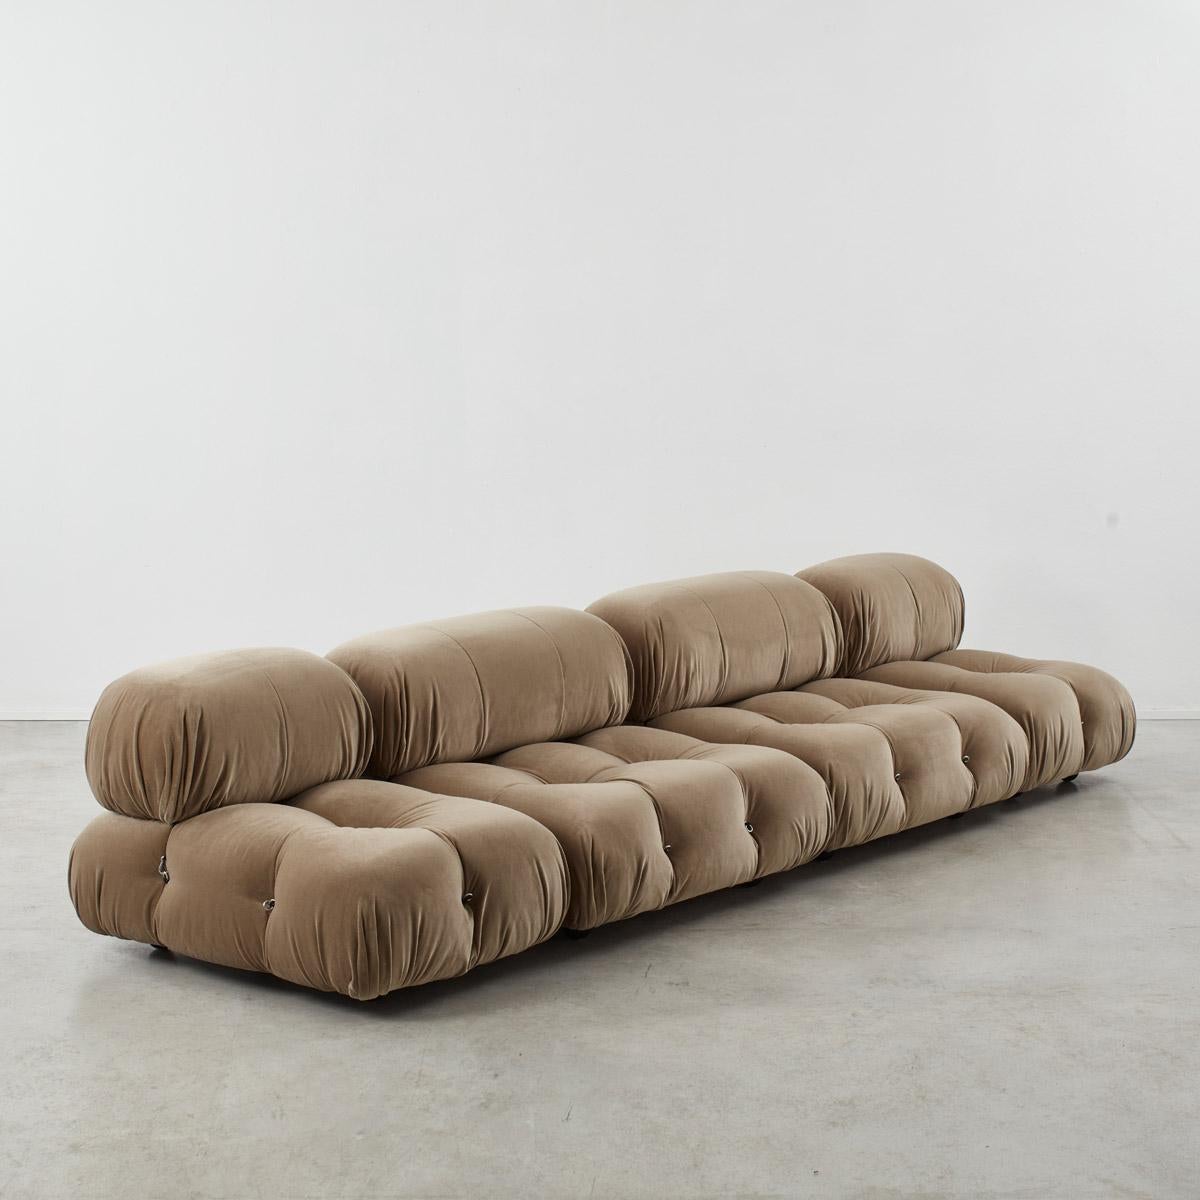 This modular sofa was designed by Mario Bellini in 1971 and was manufactured by B&B Italia. The backs and armrests are provided with rings and carabineers, which allows the user to create the desired configuration best suited to their needs. The